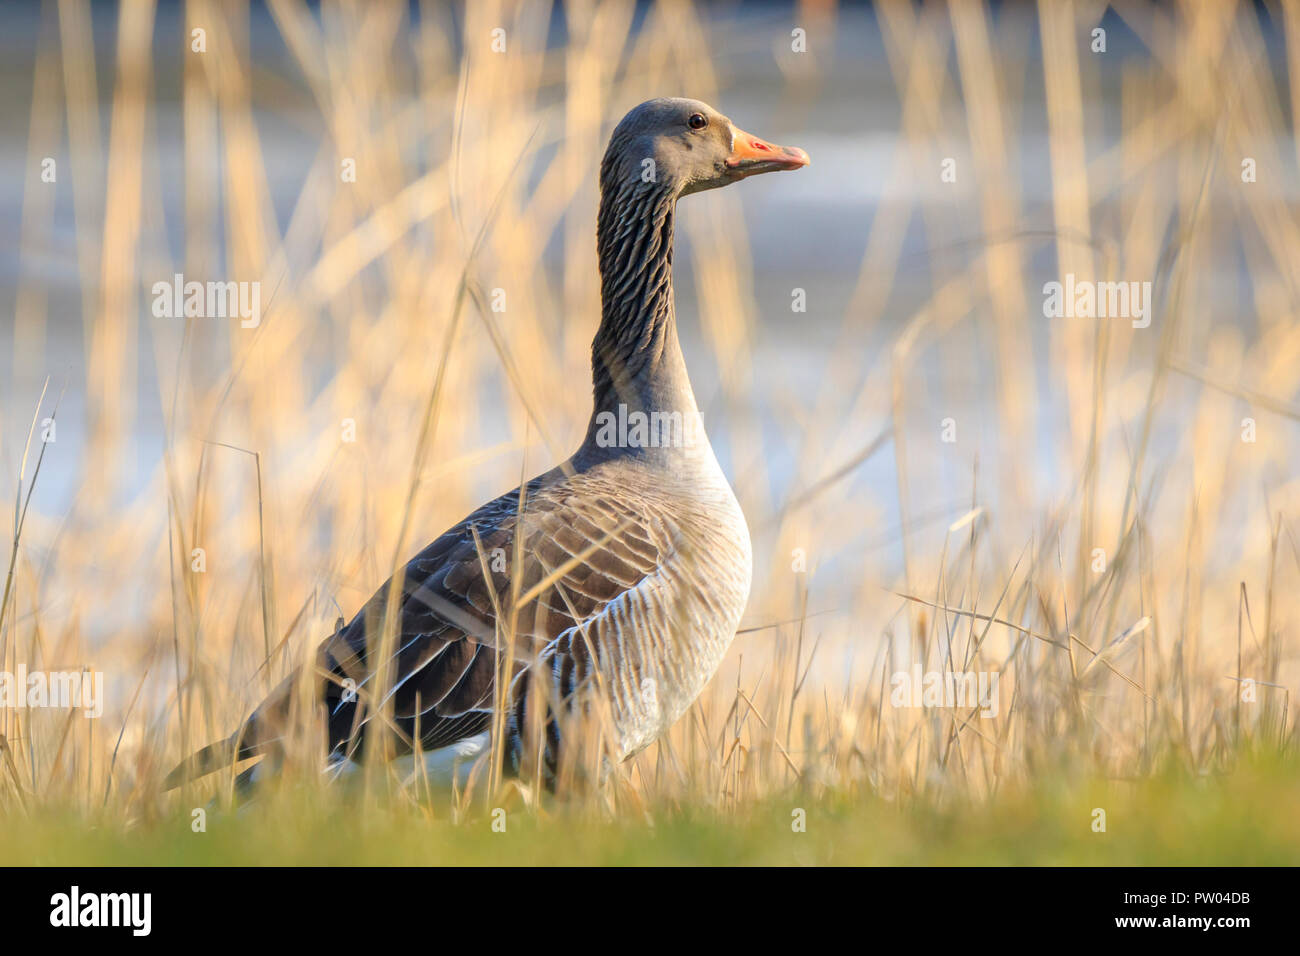 Greylag goose (Anser anser) resting in a meadow enjoying the warm sunlight during Springtime Stock Photo